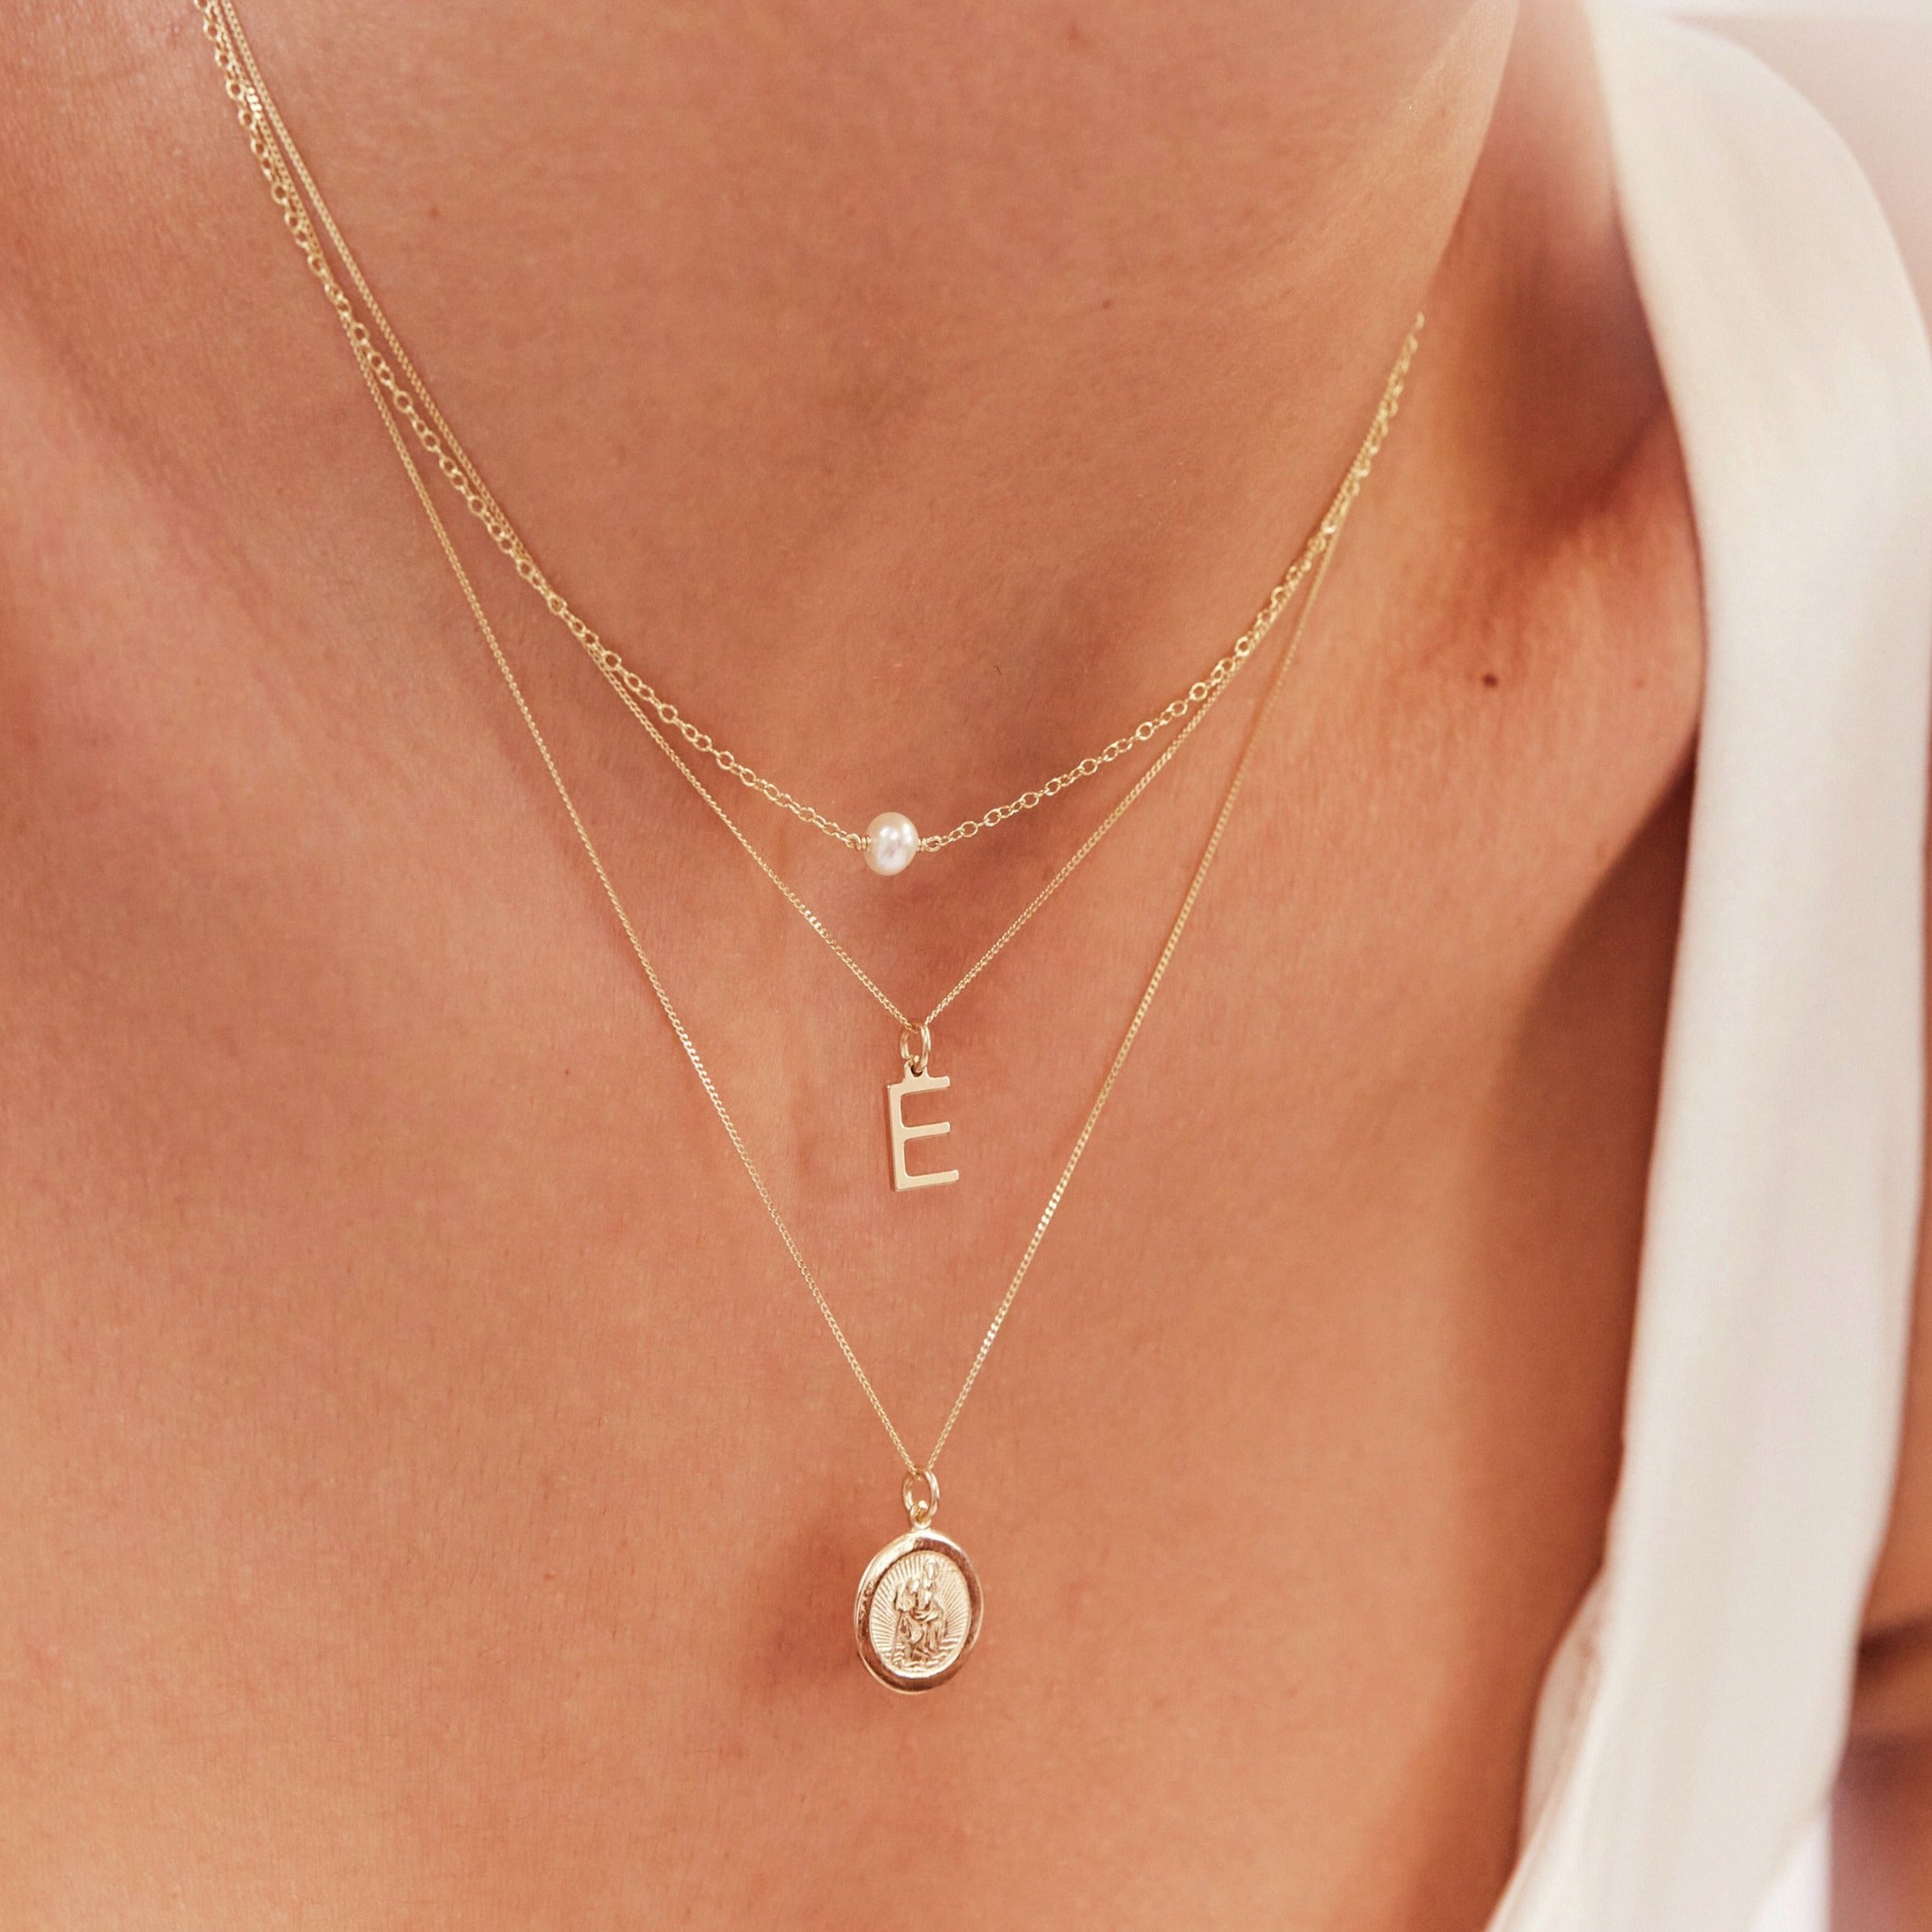 Close up of a neck wearing a gold single pearl choker layered with a gold E letter necklace and gold symbol necklace